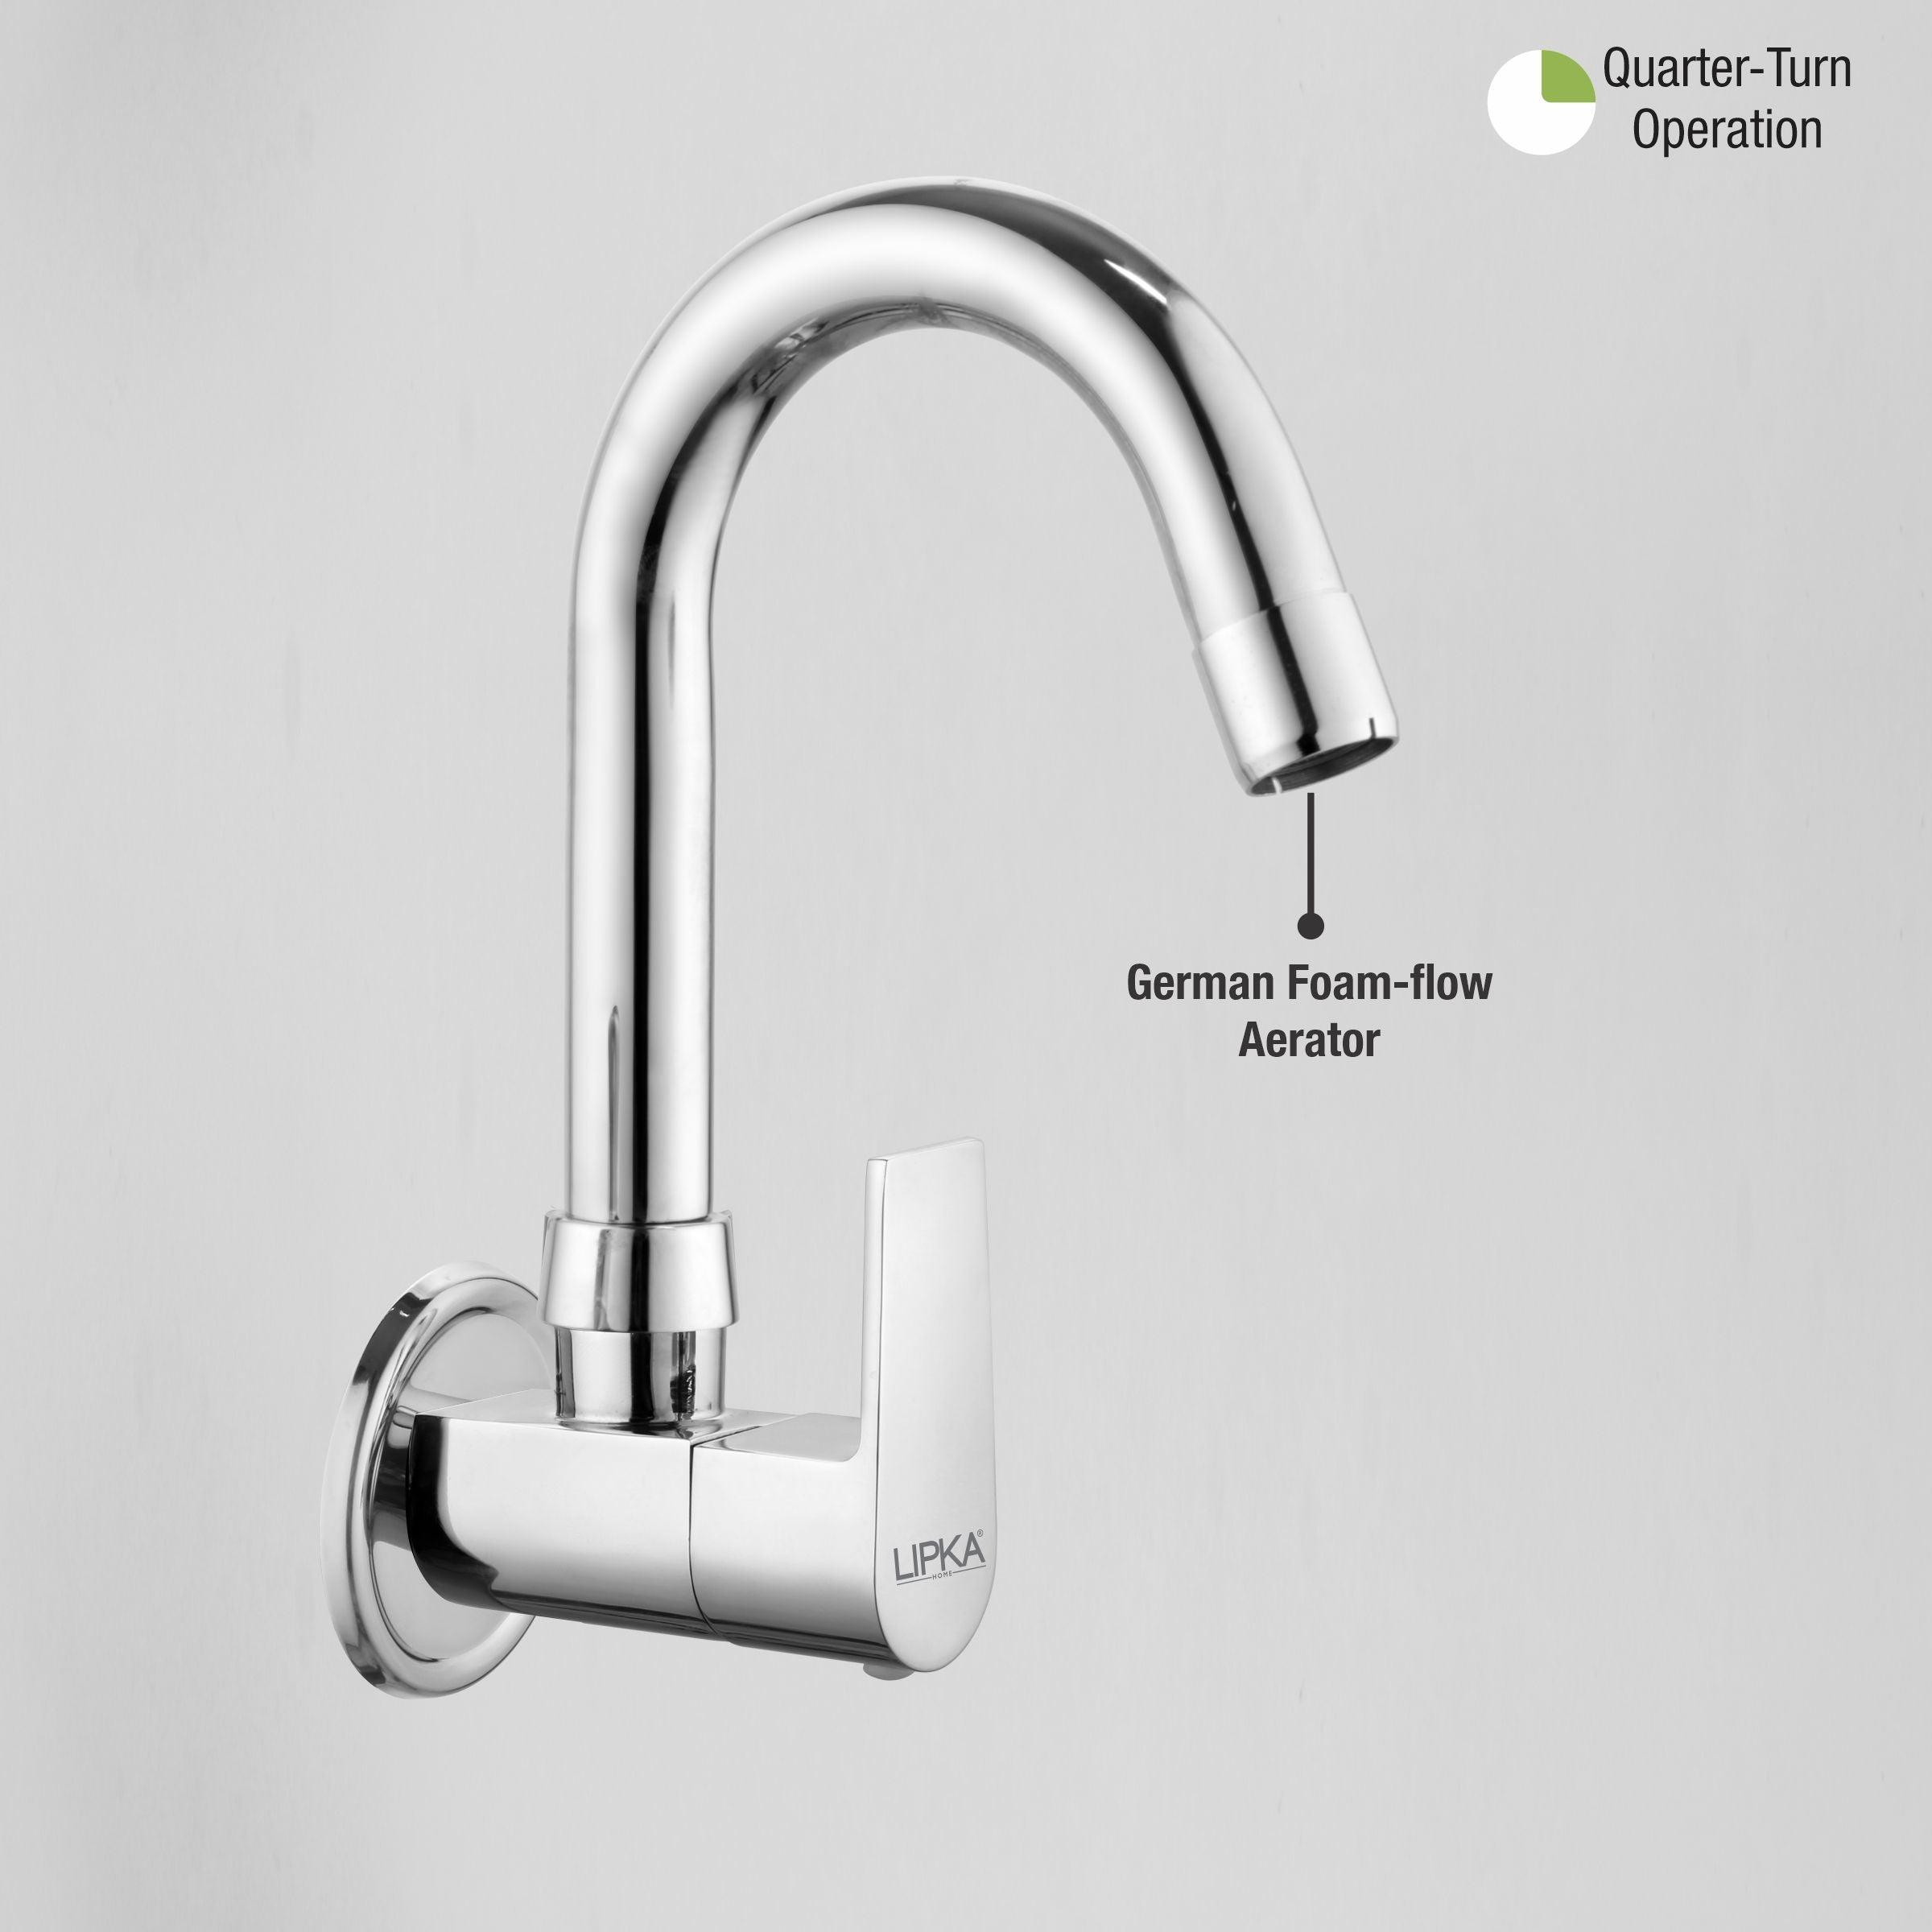 Victory Sink Tap with Small (12 Inches) Round Swivel Spout Brass Faucet - LIPKA - Lipka Home